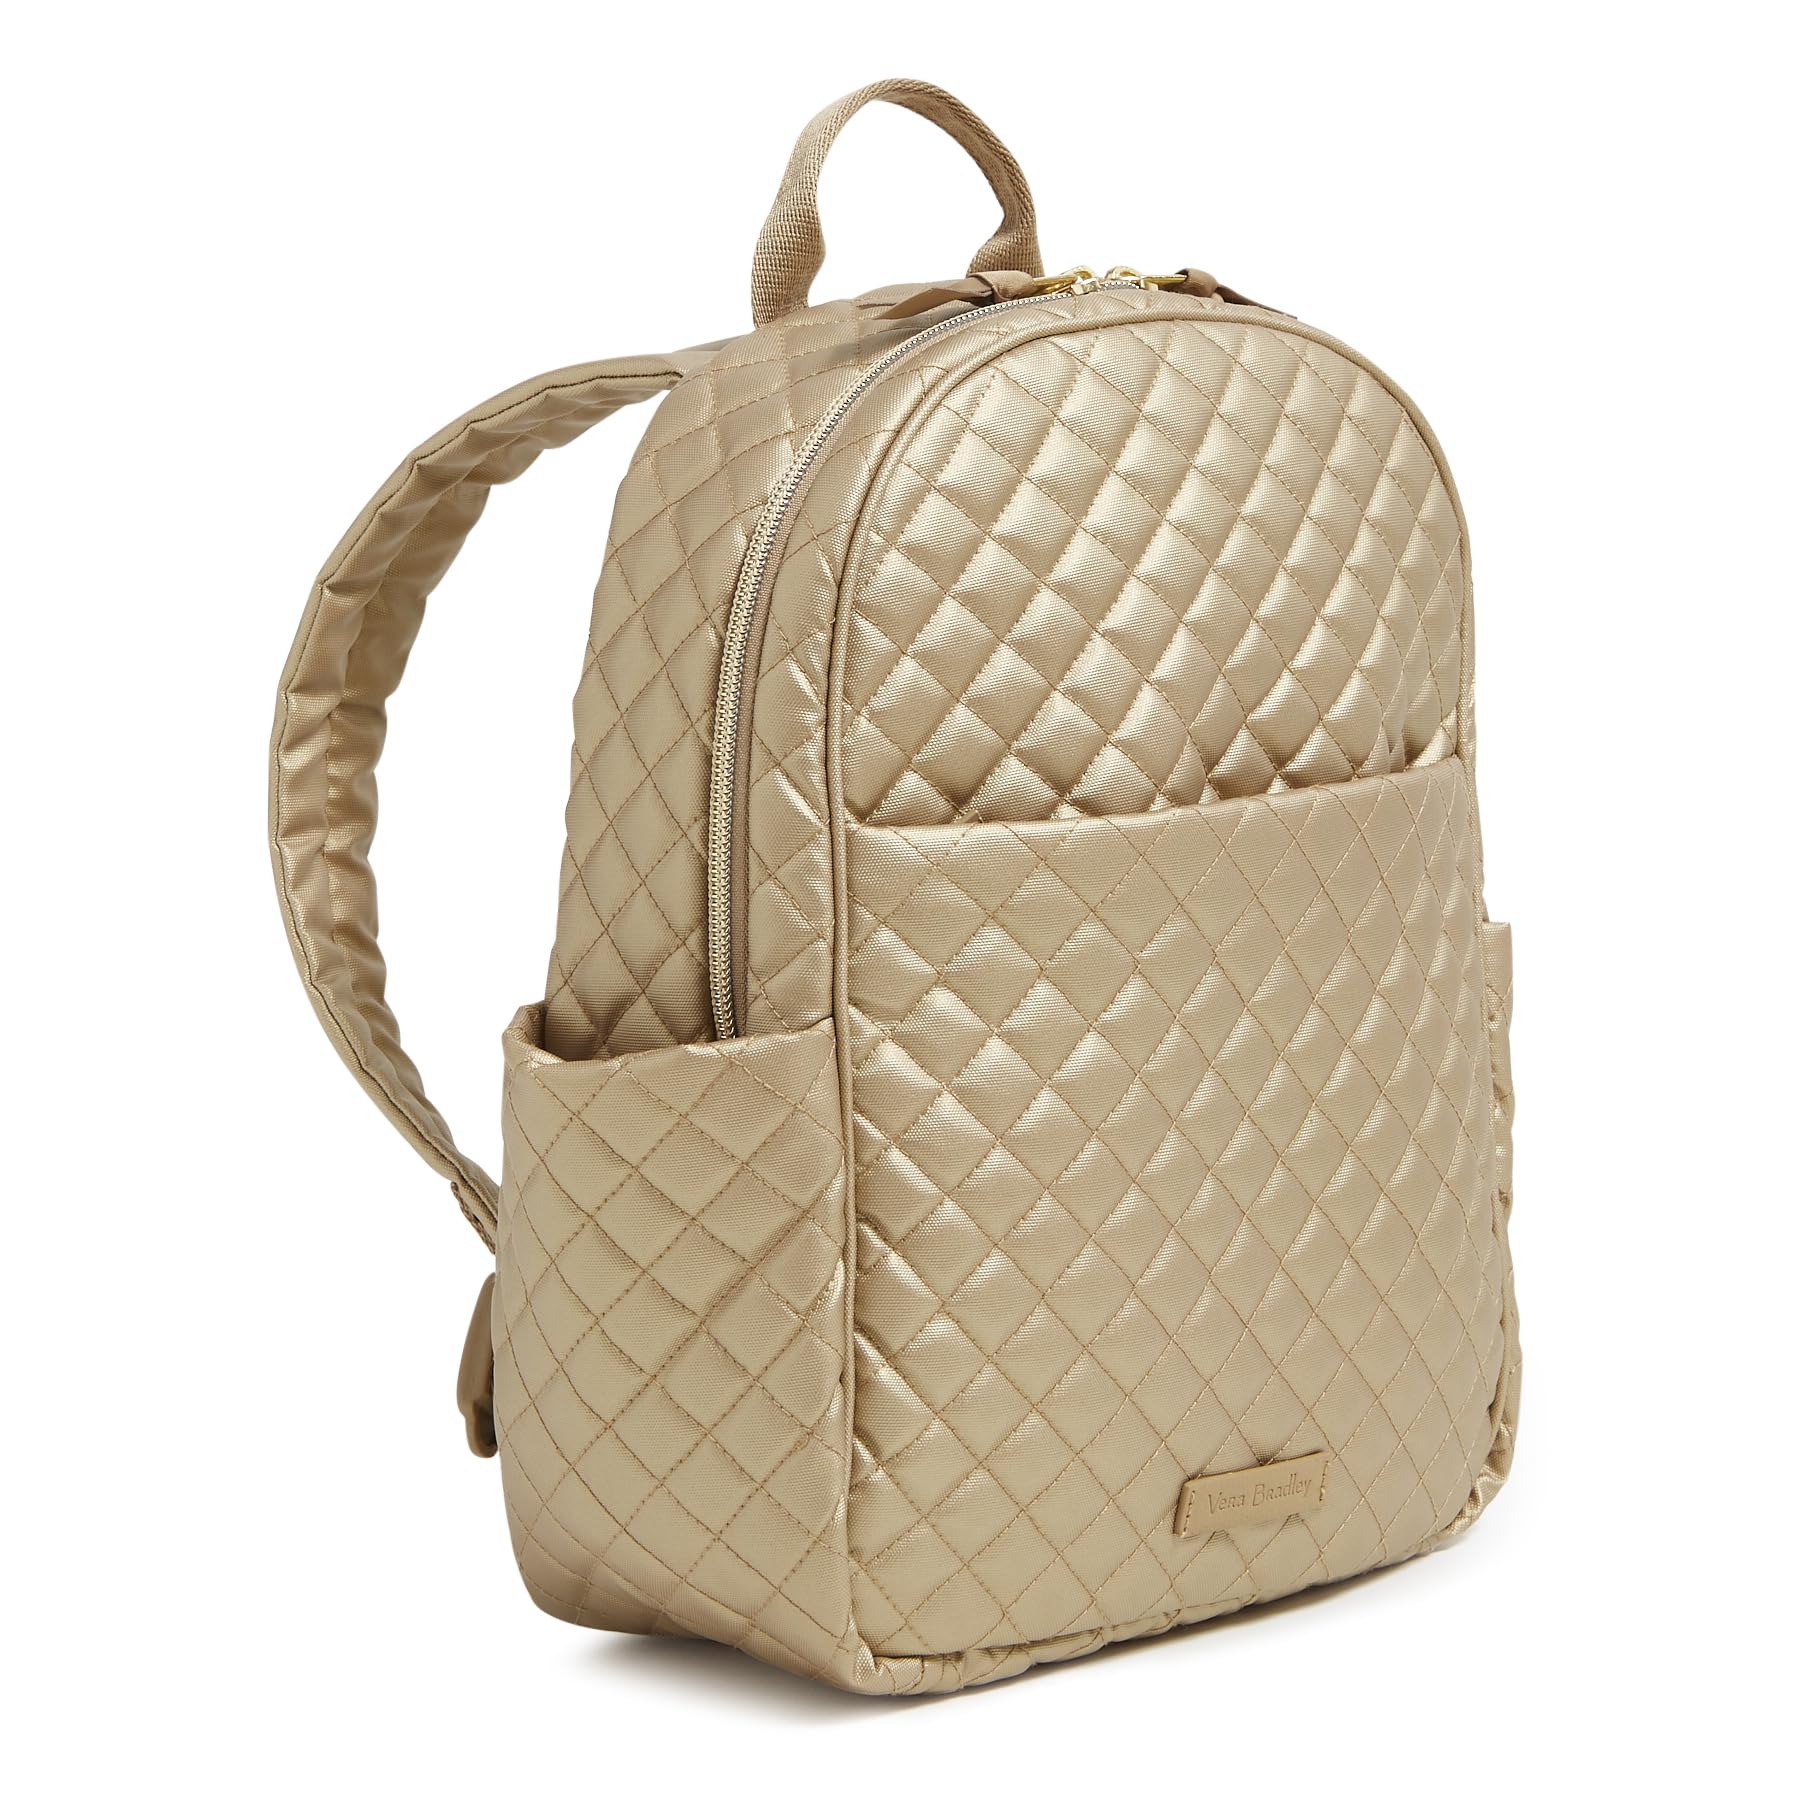 Vera Bradley Women's Cotton Small Backpack, Champagne Gold Pearl, One Size